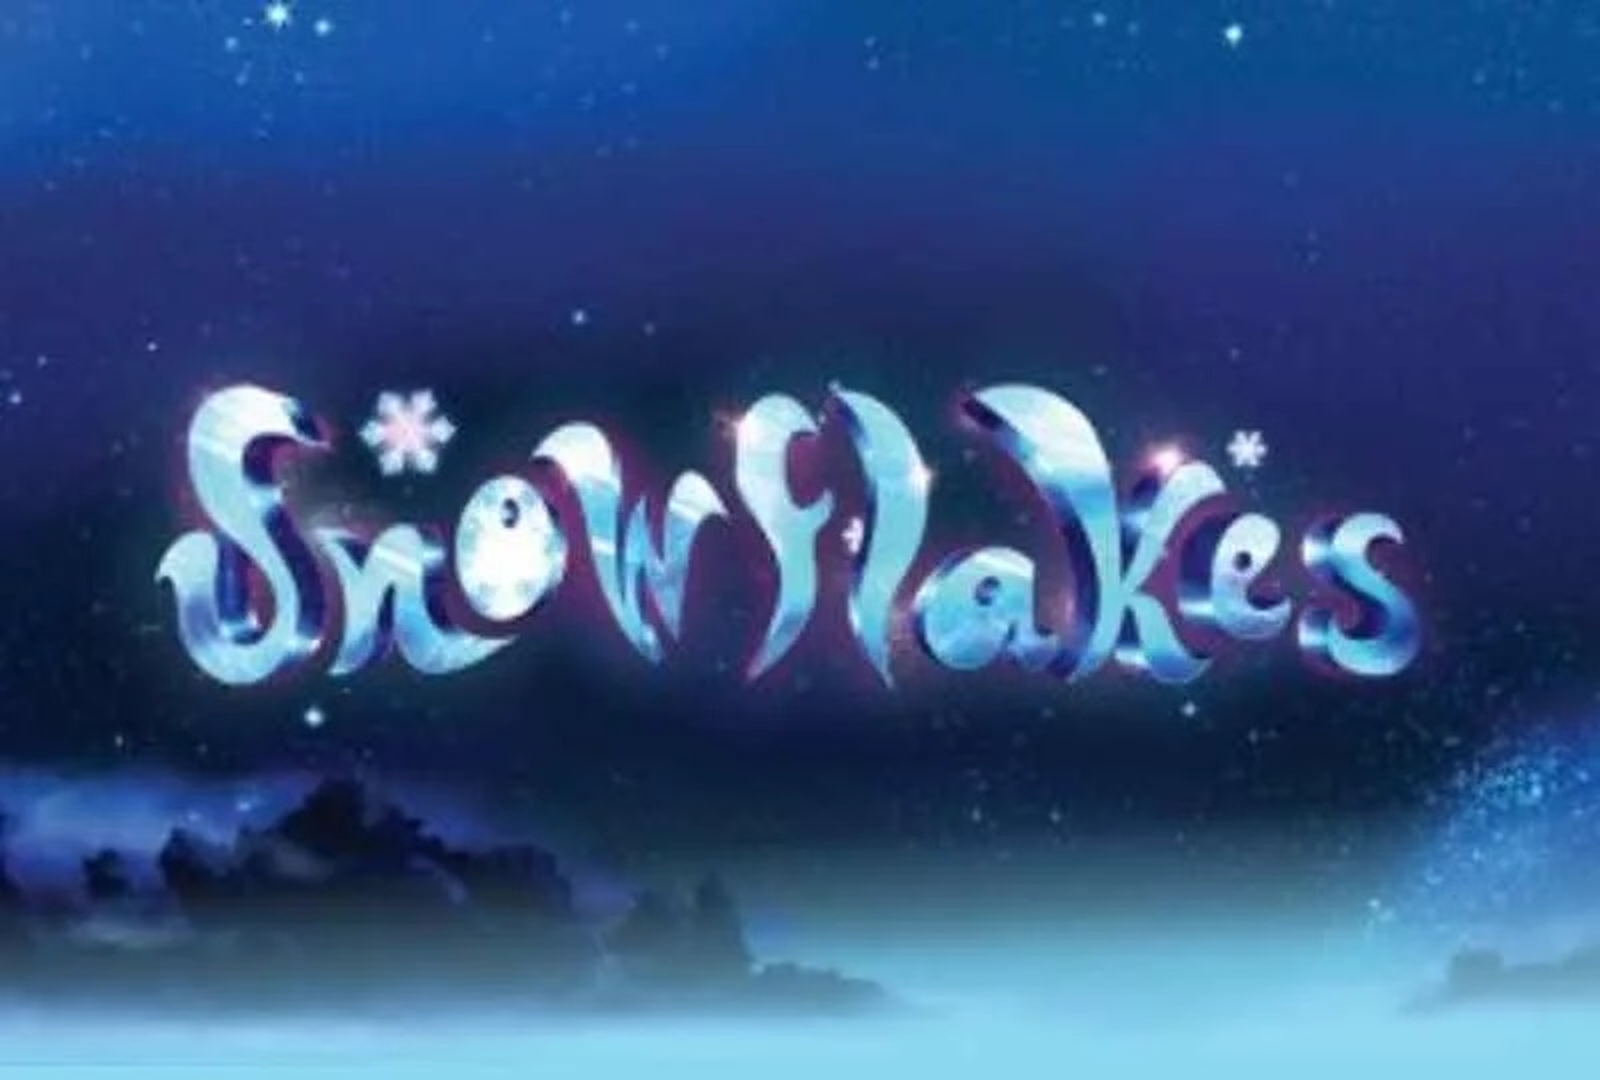 The Snowflakes Online Slot Demo Game by NextGen Gaming